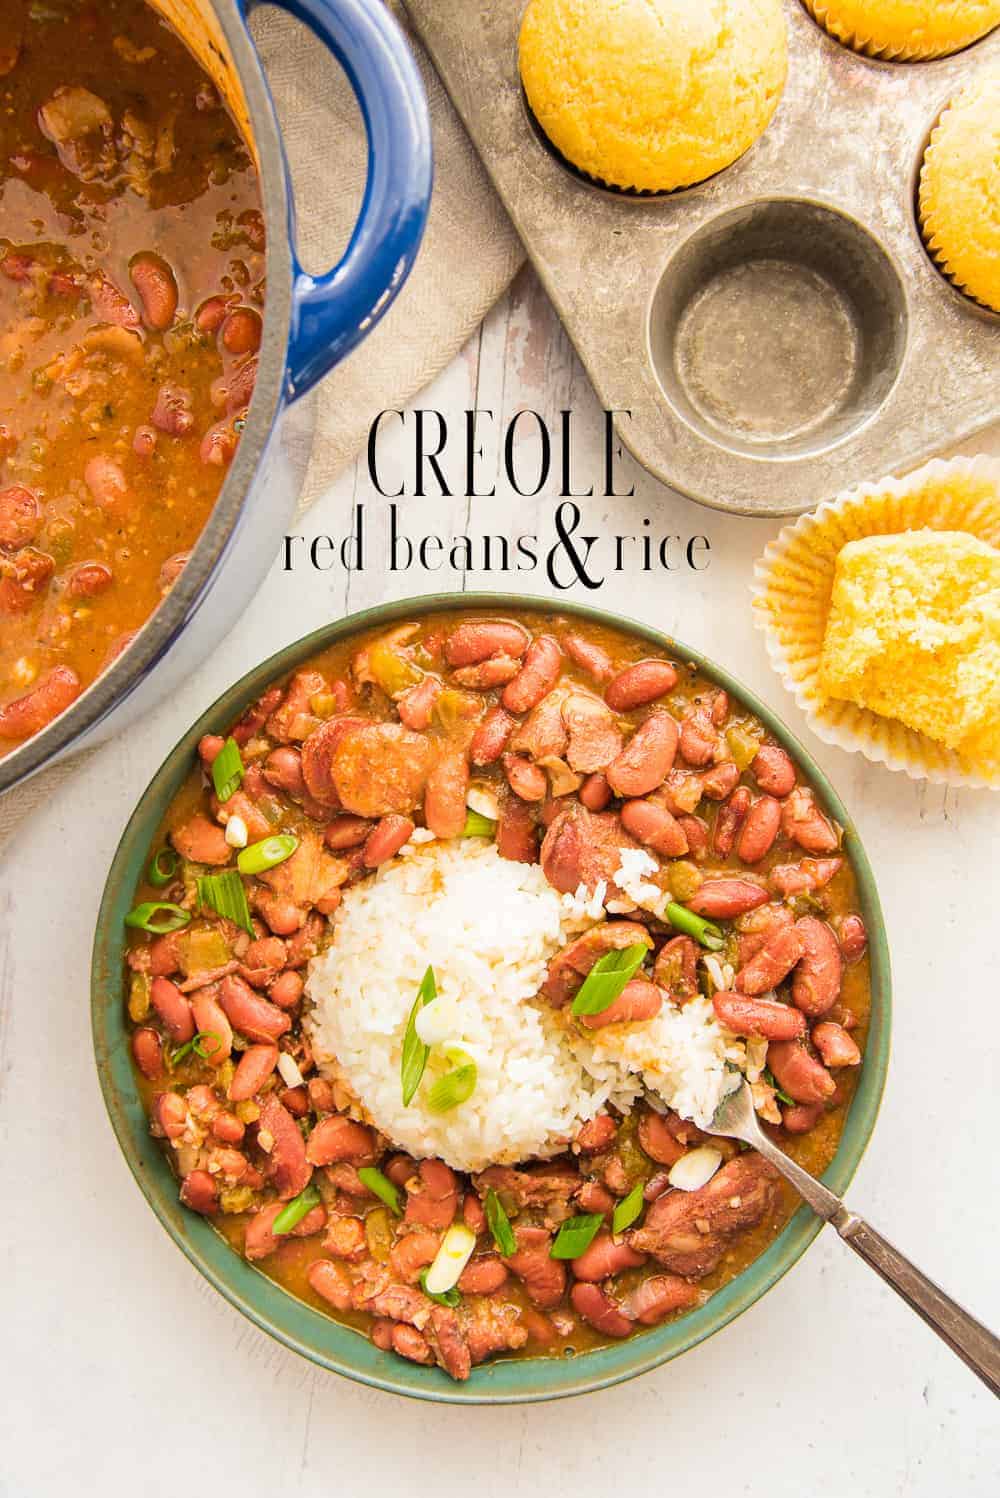 Creole Red Beans and Rice are a meal in themselves. Savory kidney beans are simmered with aromatics, bacon, and sausage to make an inexpensive, yet filling meal. #redbeansandrice #kidneybeans #creolerecipe #cajunrecipe #MardiGrasrecipe #soulfoodrecipe #southernrecipe #andouillesausage #beansandrice #arrozconhabichuelas #habichuelasguisadas #frijoles #frijolesconarroz #cooking #onepotrecipe via @ediblesense